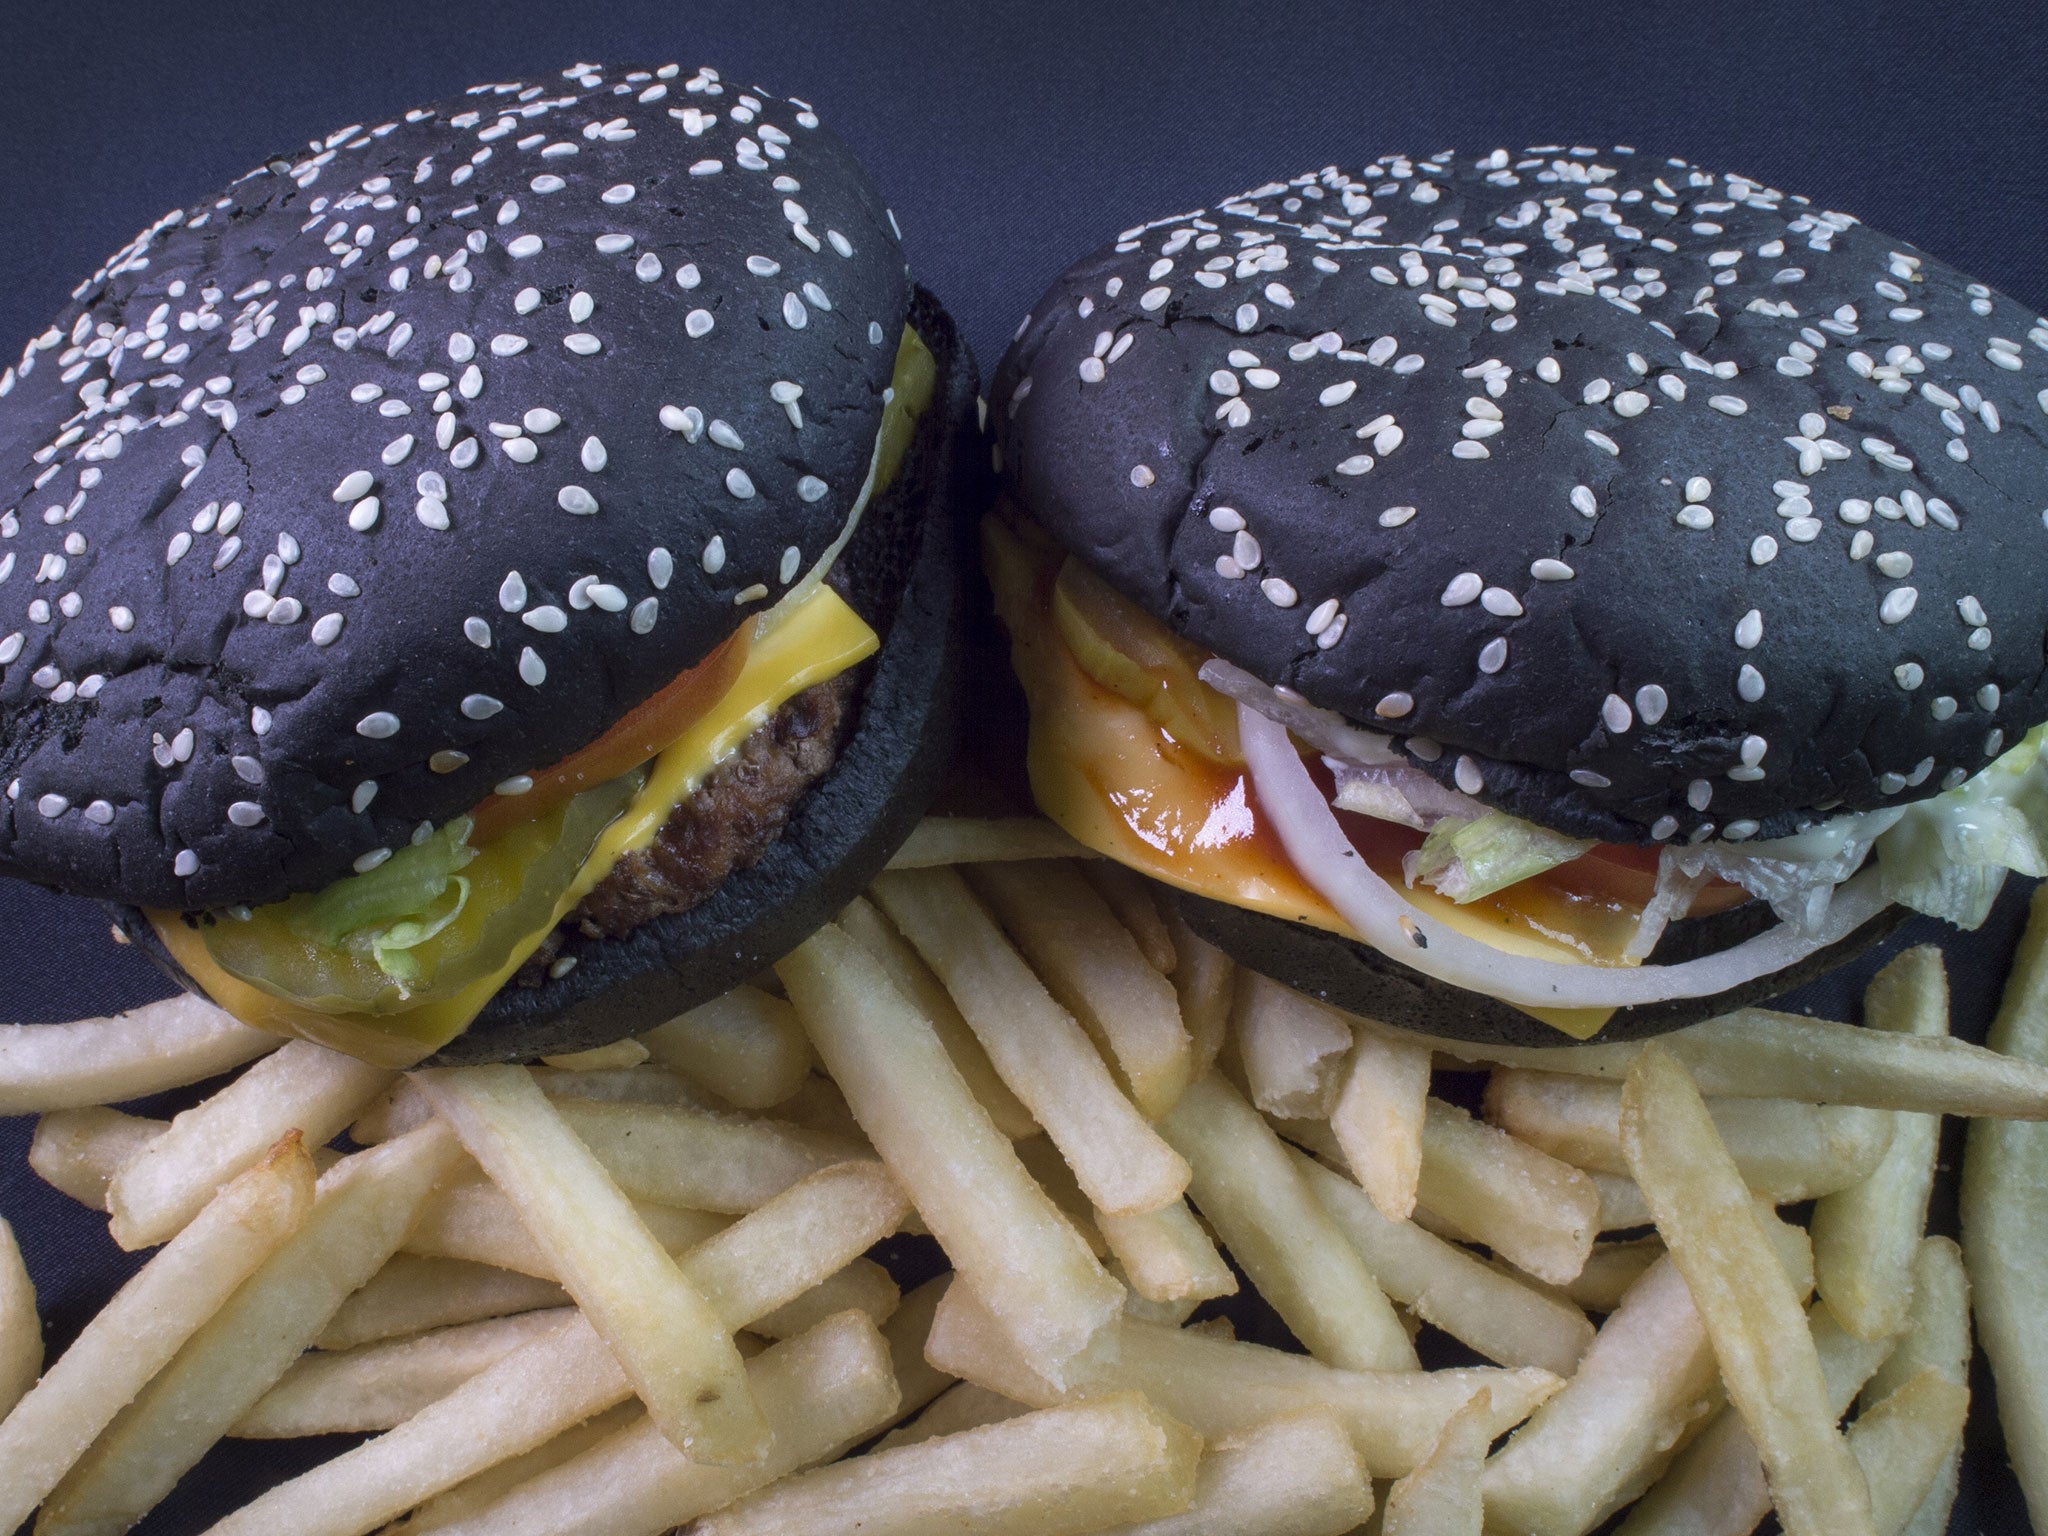 The King unveiled the black burger last week